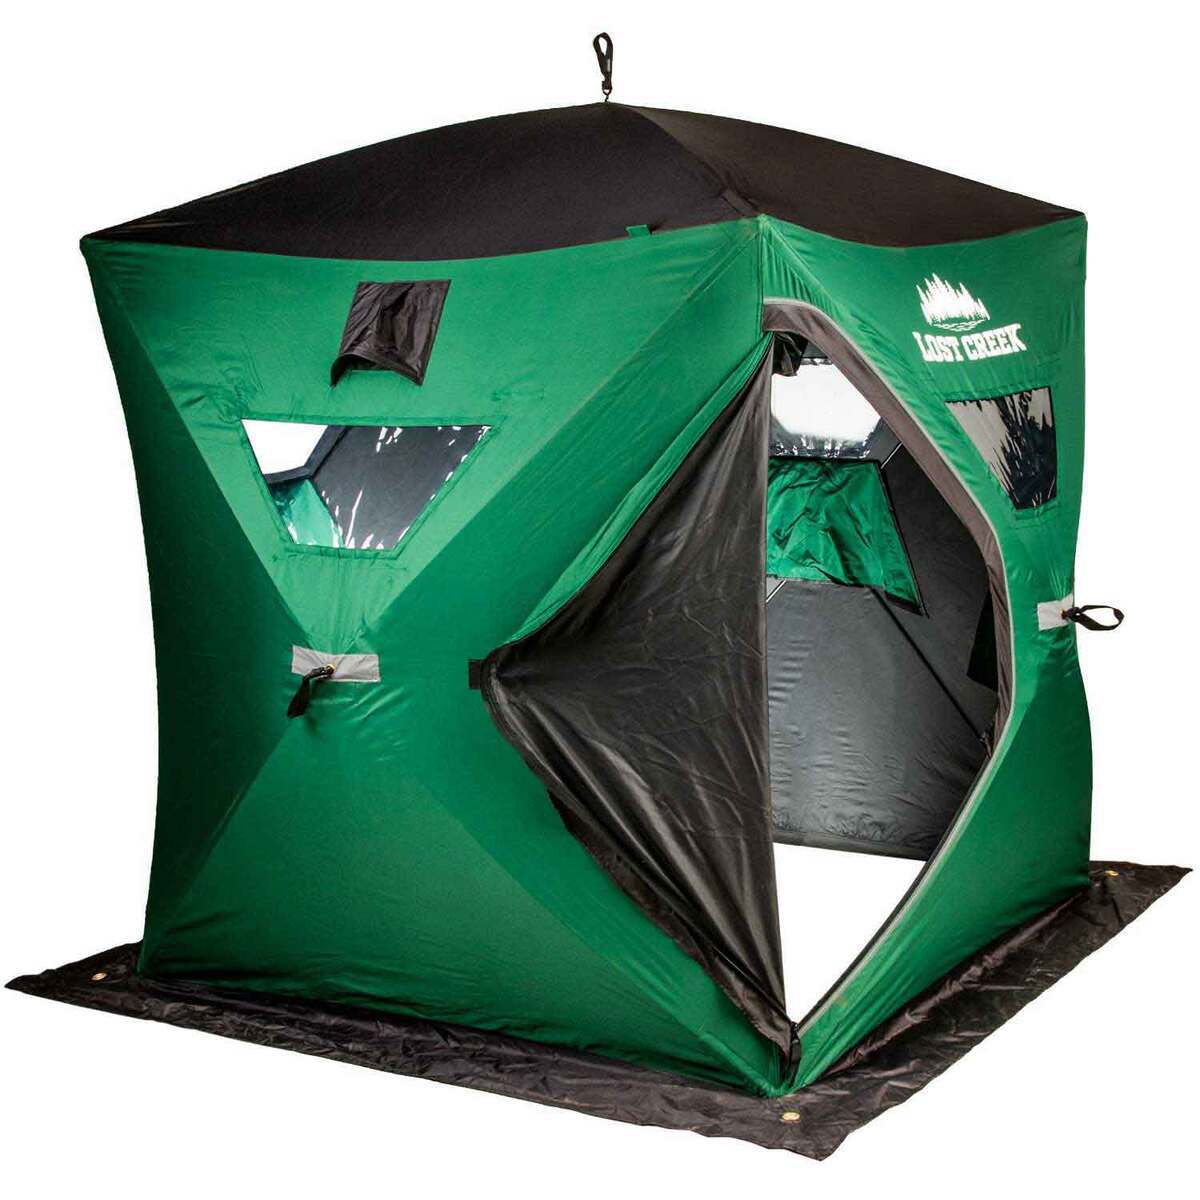 Lost Creek Gale Force 2-Man Hub Ice Fishing Shelter - Green by Sportsman's Warehouse